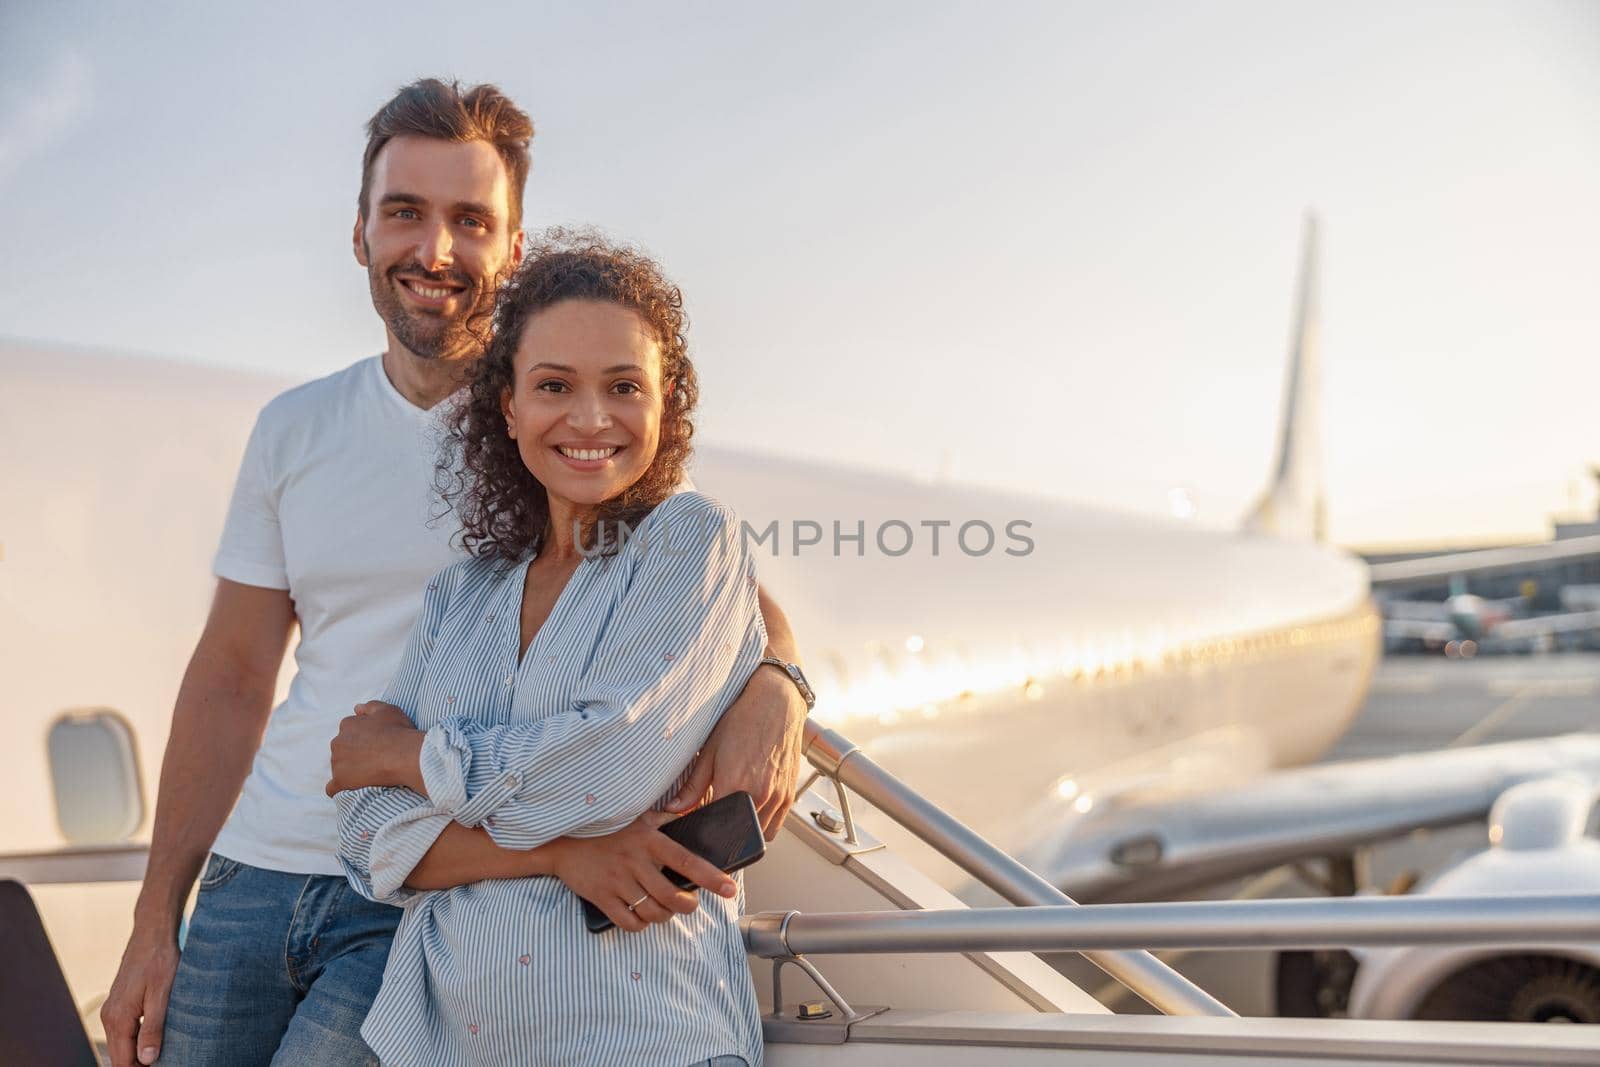 Portrait of happy couple of tourists, man and woman looking excited while standing together outdoors ready for boarding the plane at sunset by Yaroslav_astakhov